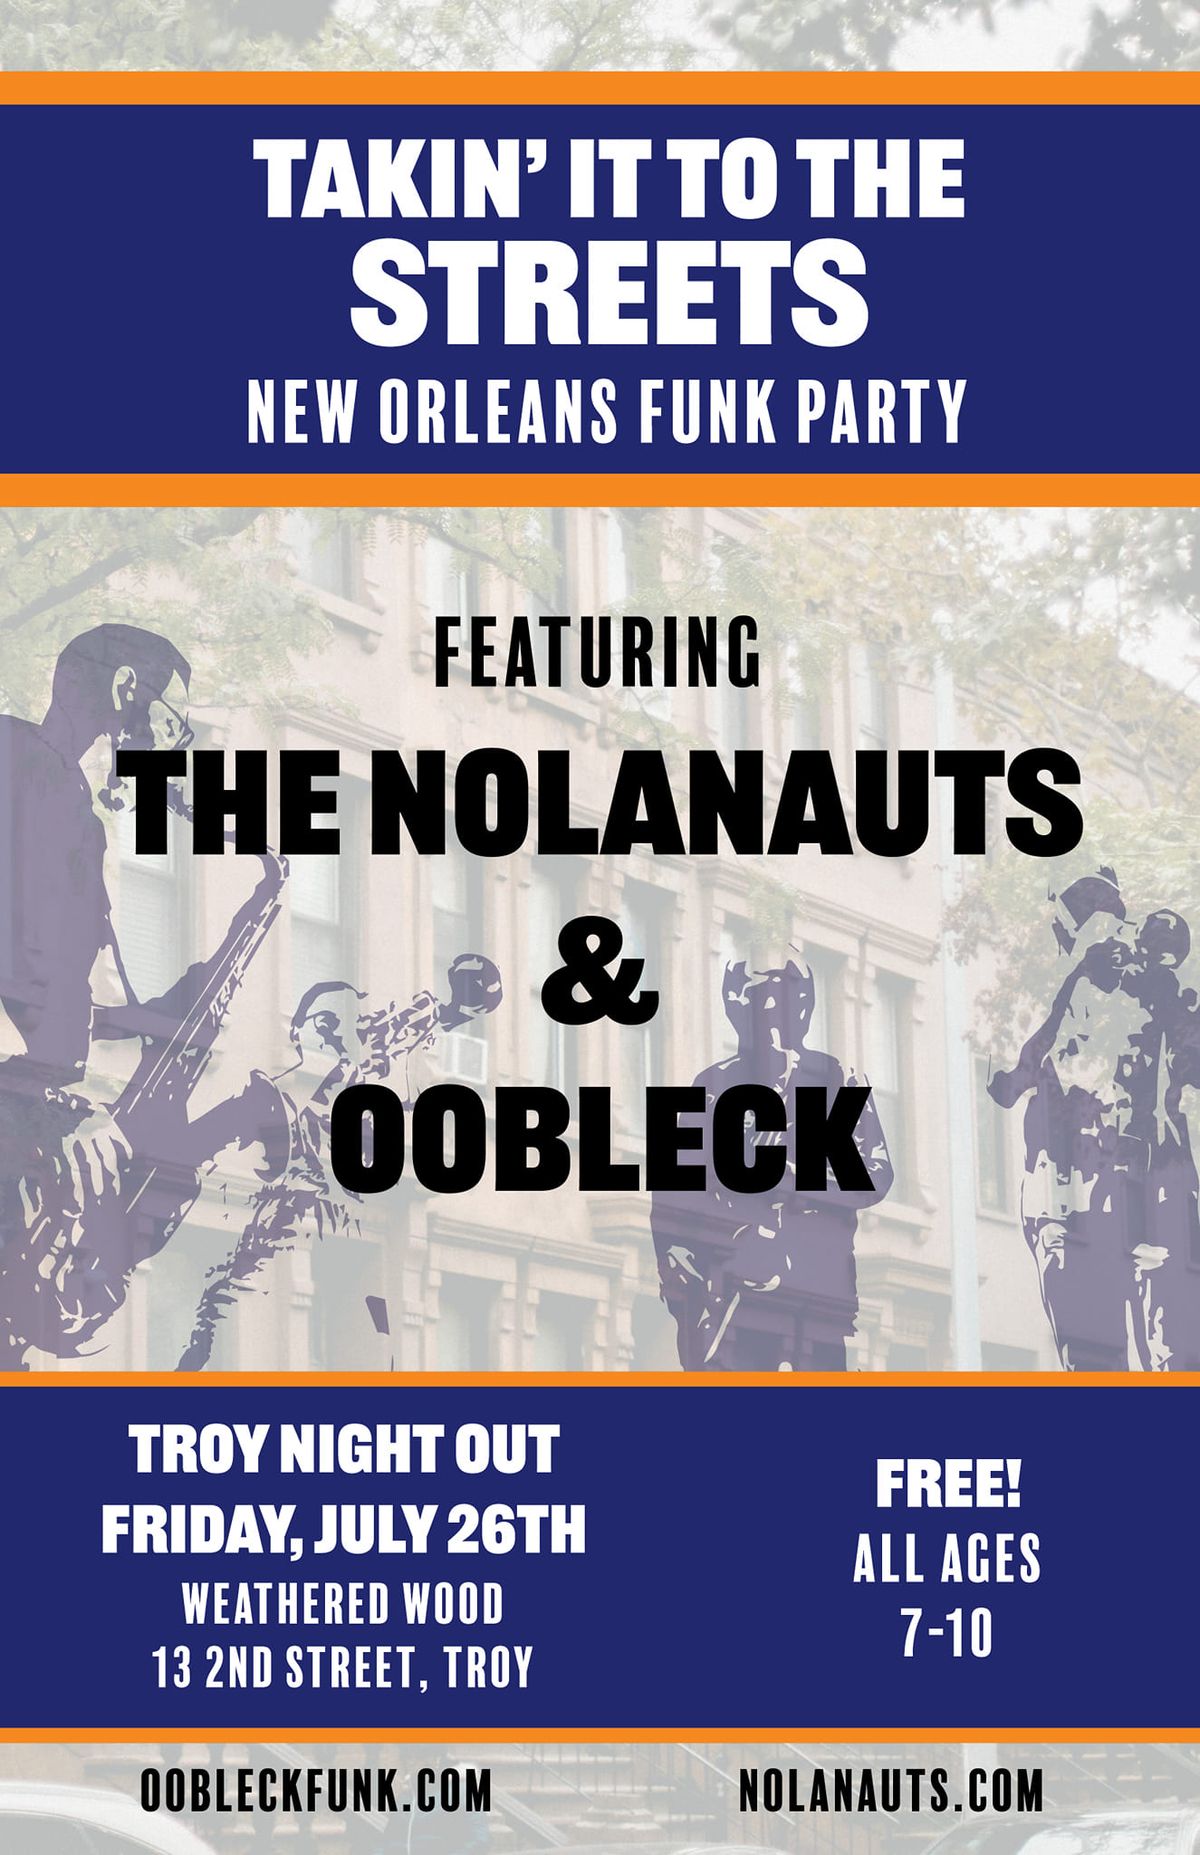 Oobleck & The Nolanauts - Troy Night Out